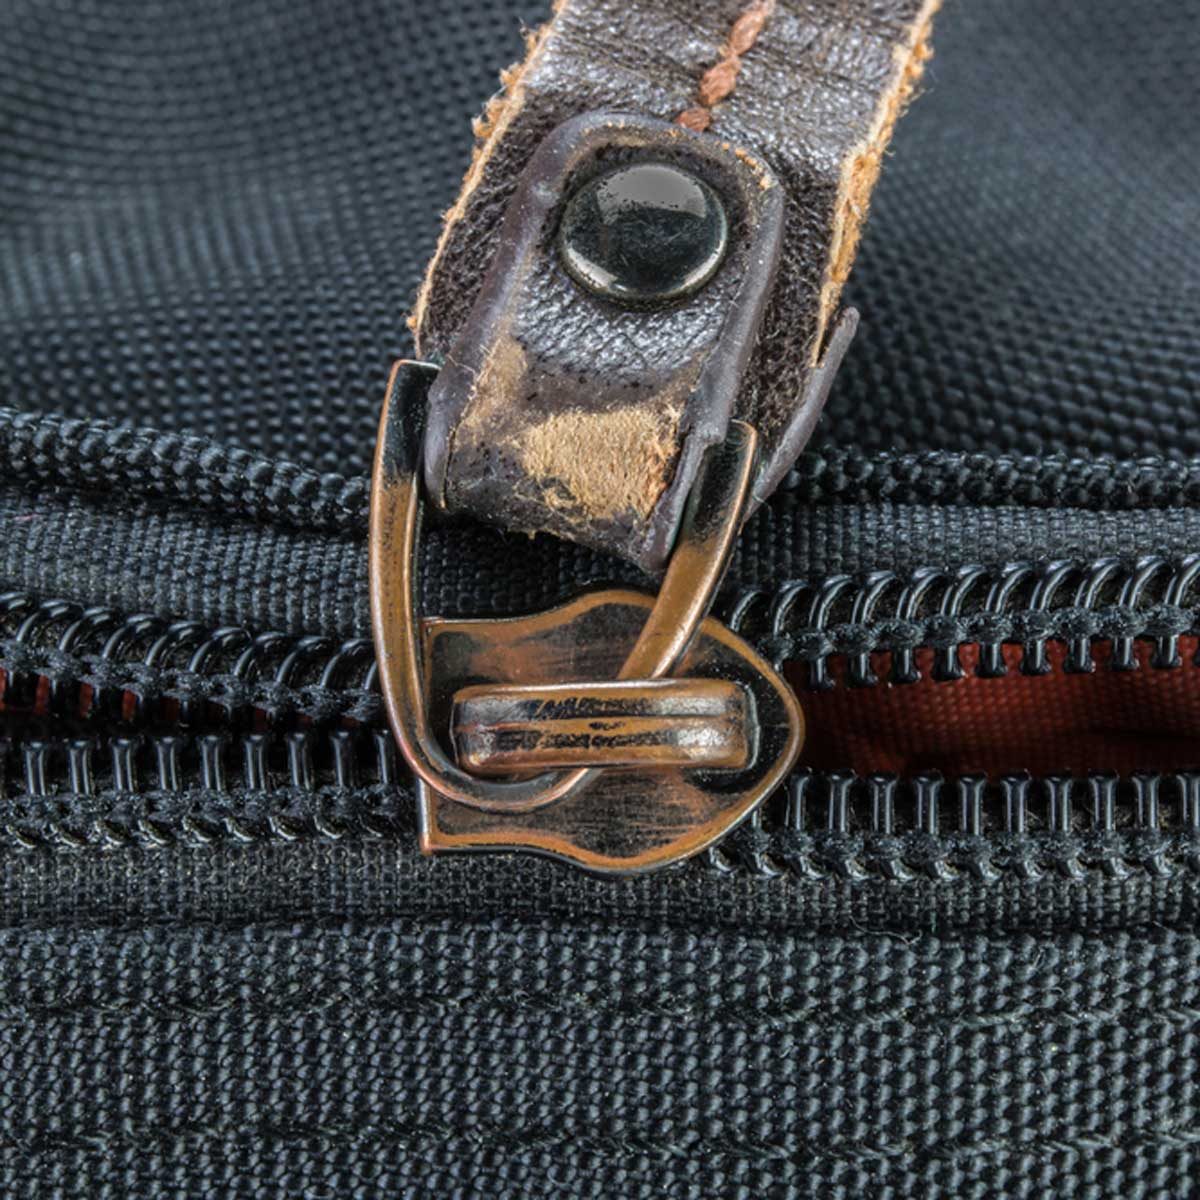 Any idea how much to replace the zipper pull on this vintage